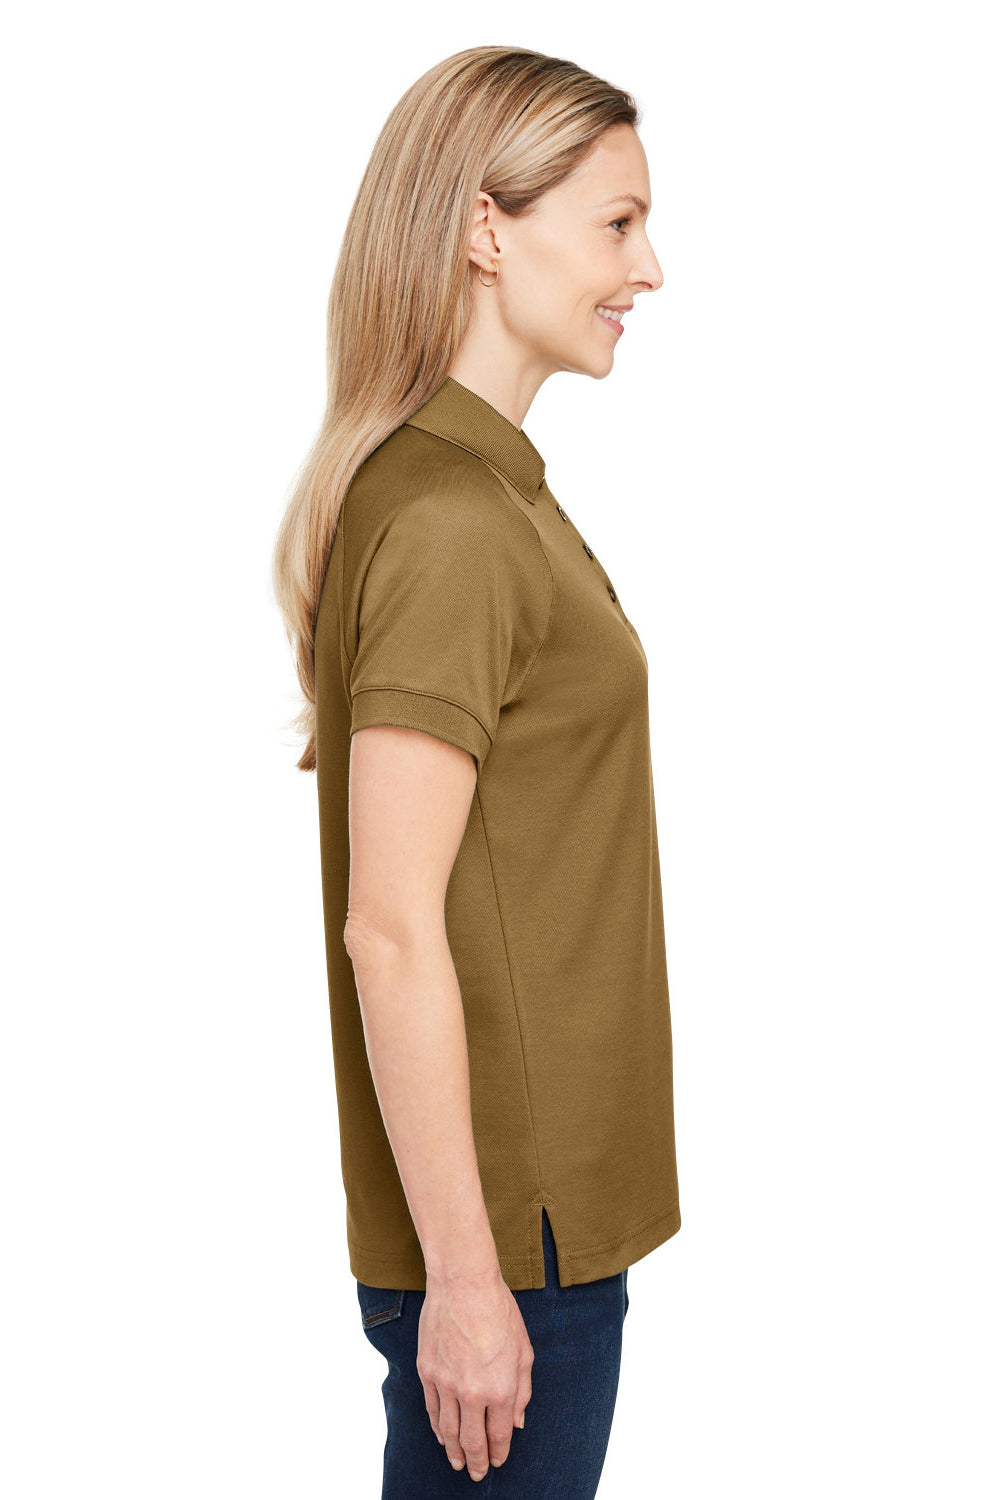 Harriton M208W Womens Charge Moisture Wicking Short Sleeve Polo Shirt Coyote Brown Side